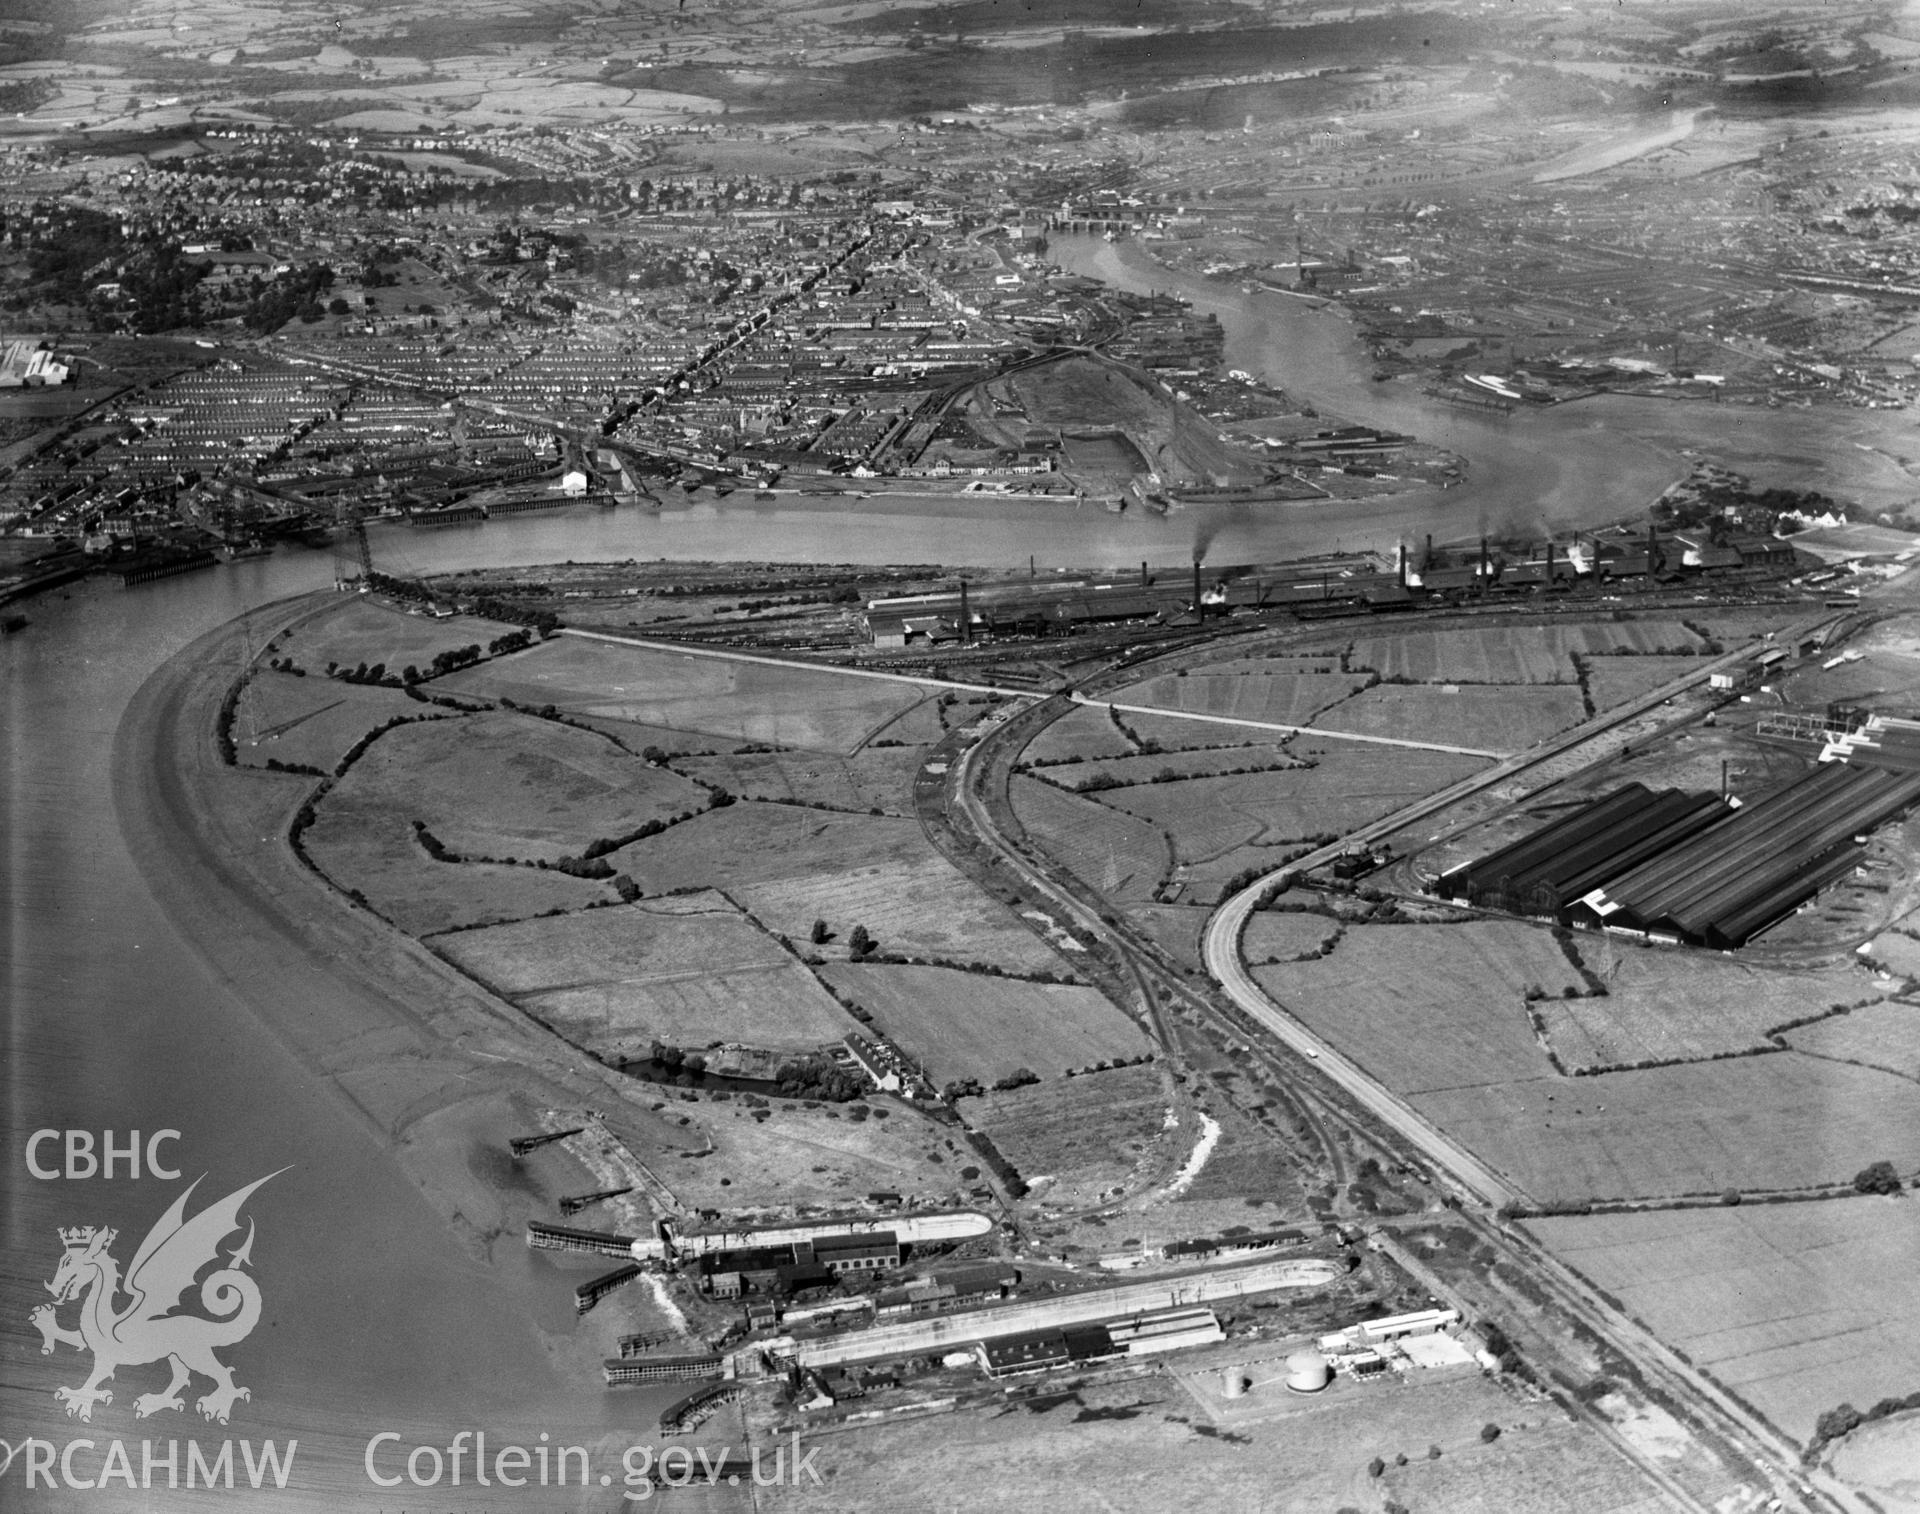 View of Newport showing  Orb Steelworks, Newport Tubeworks and dry docks, oblique aerial view. 5?x4? black and white glass plate negative.